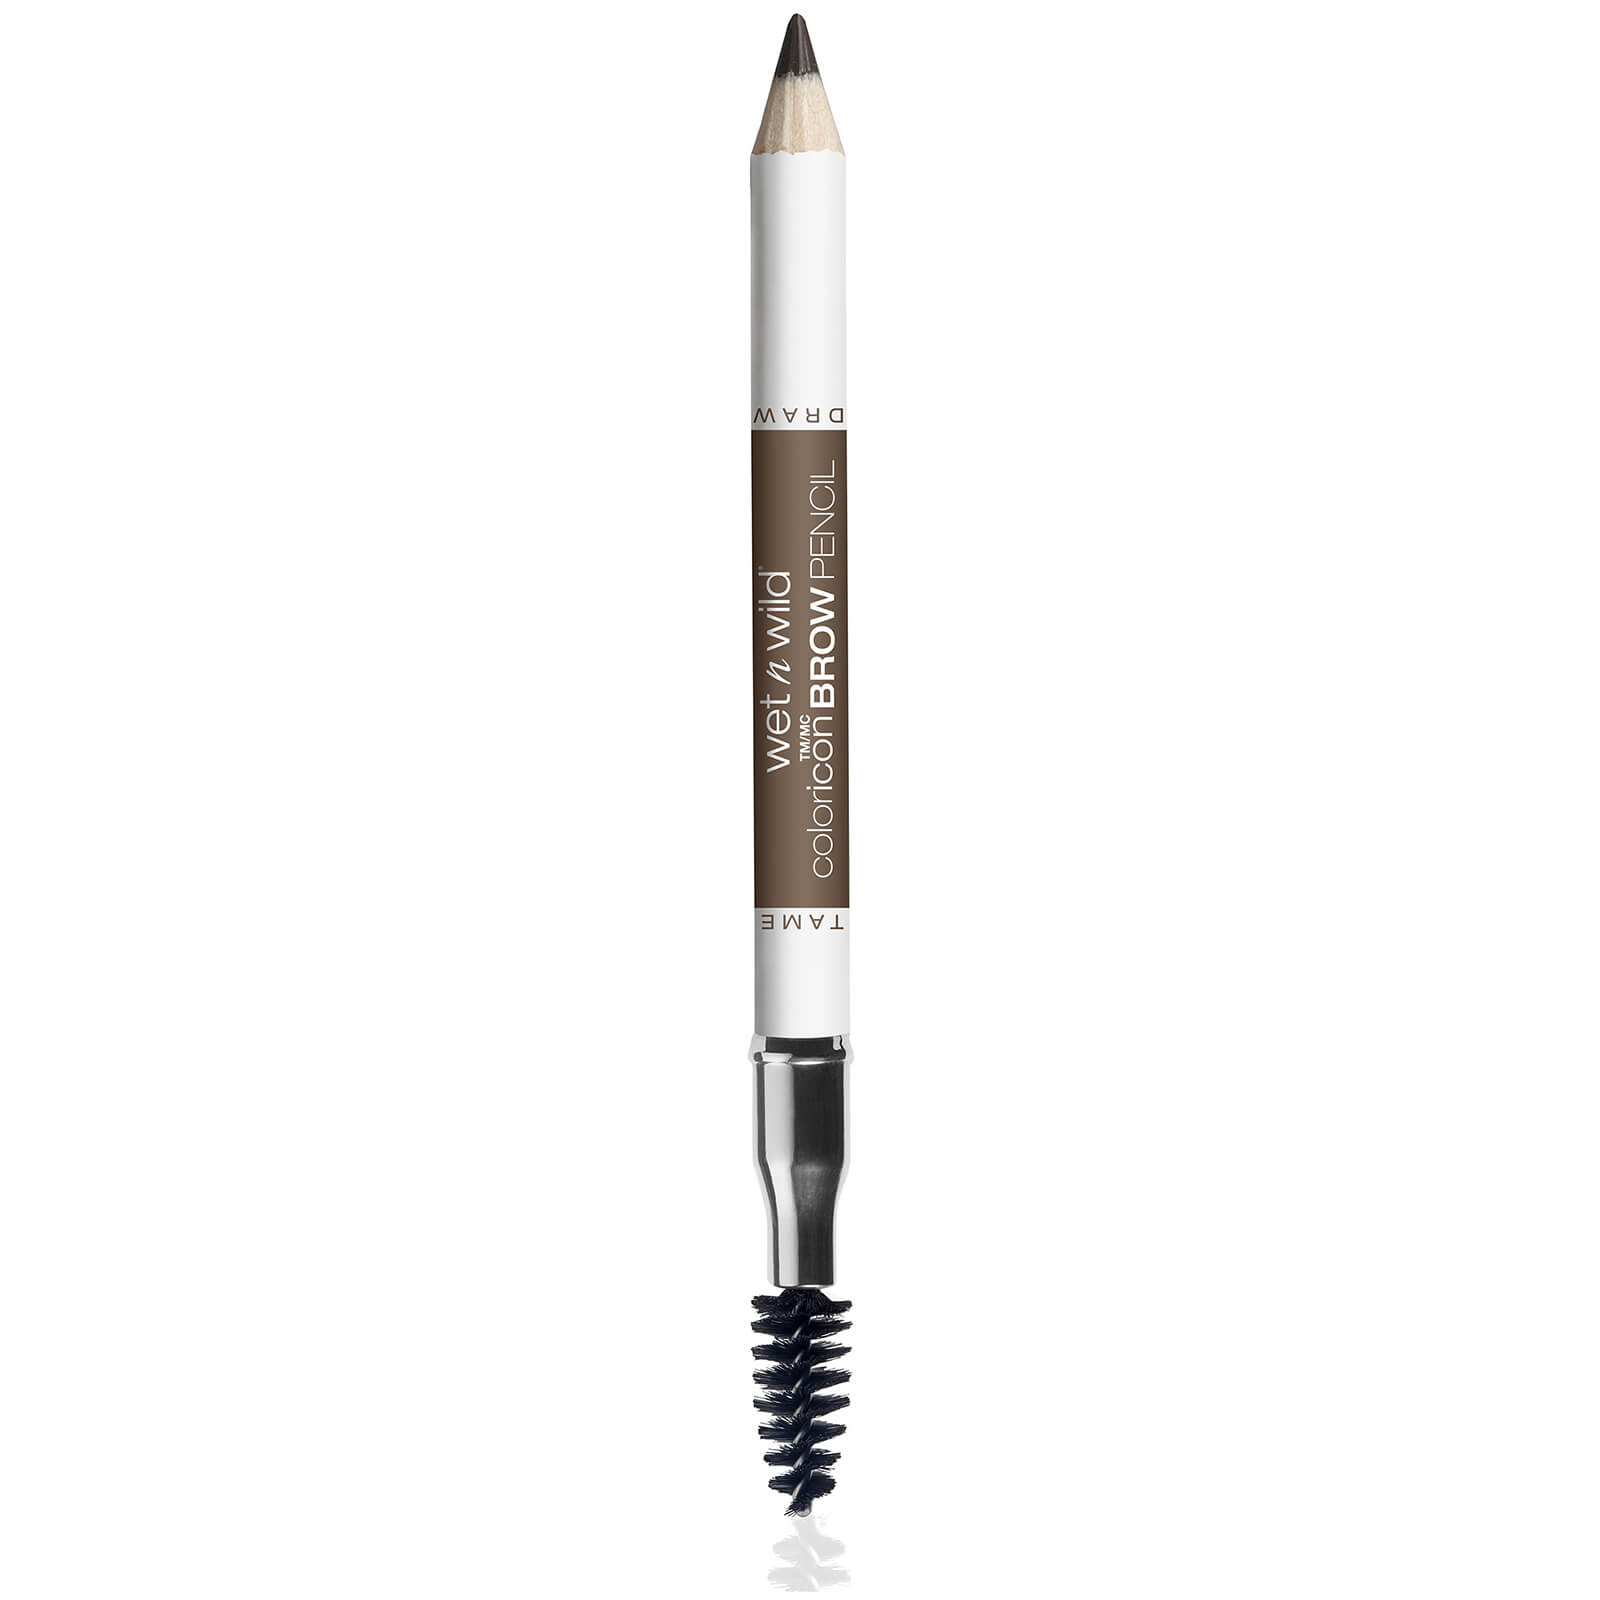 wet n wild coloricon Brow Pencil 0.7g (Various Shades) - Brunettes do it Better